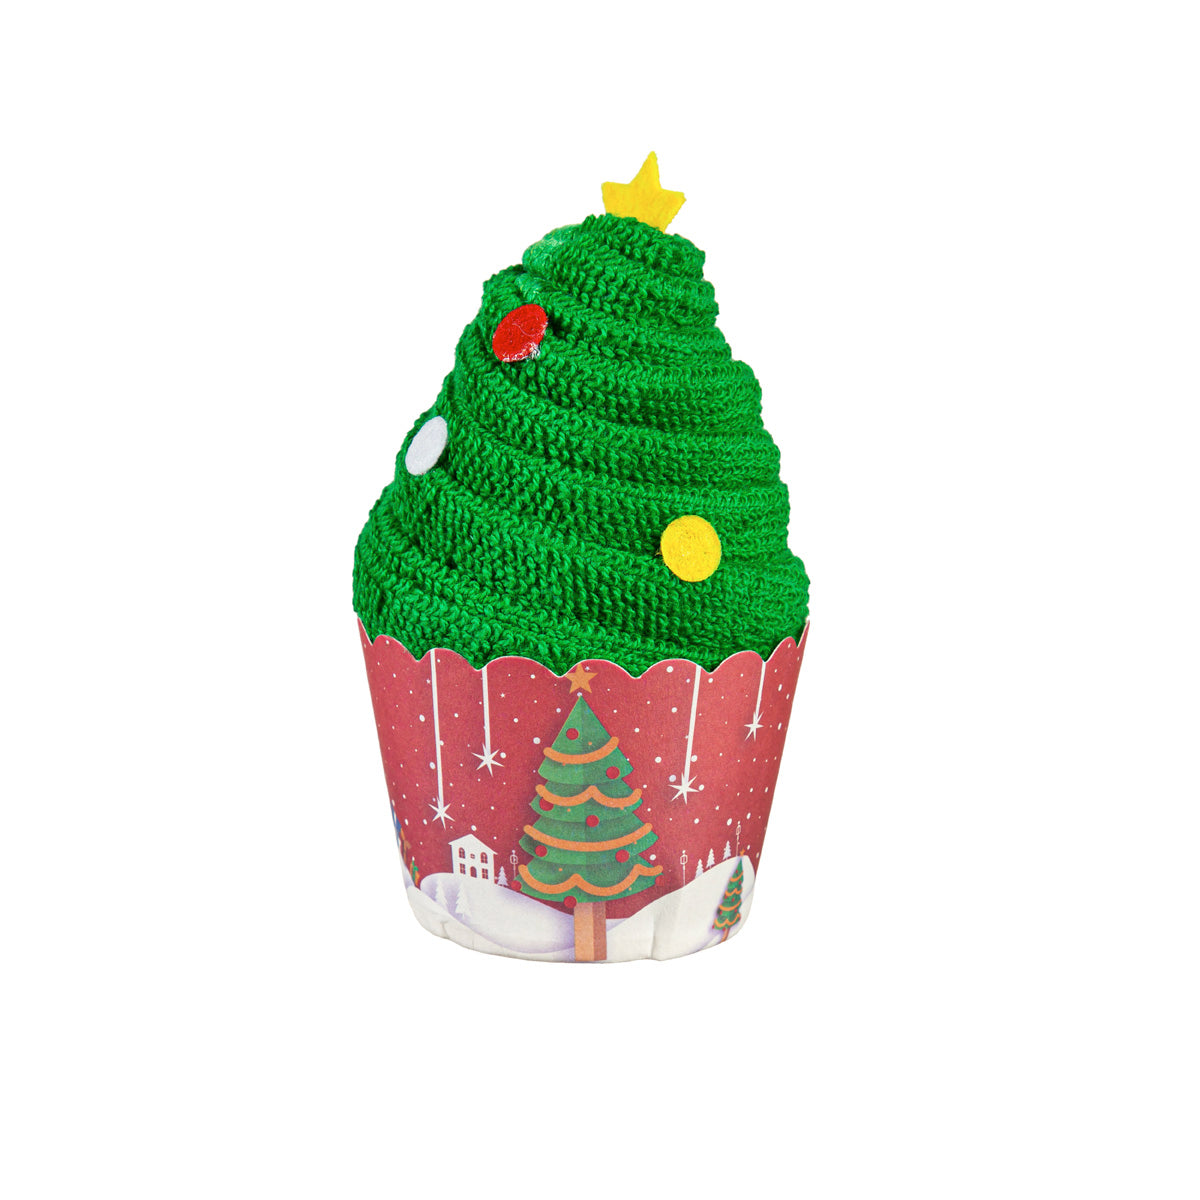 Washcloth in Christmas Tree Wrapping